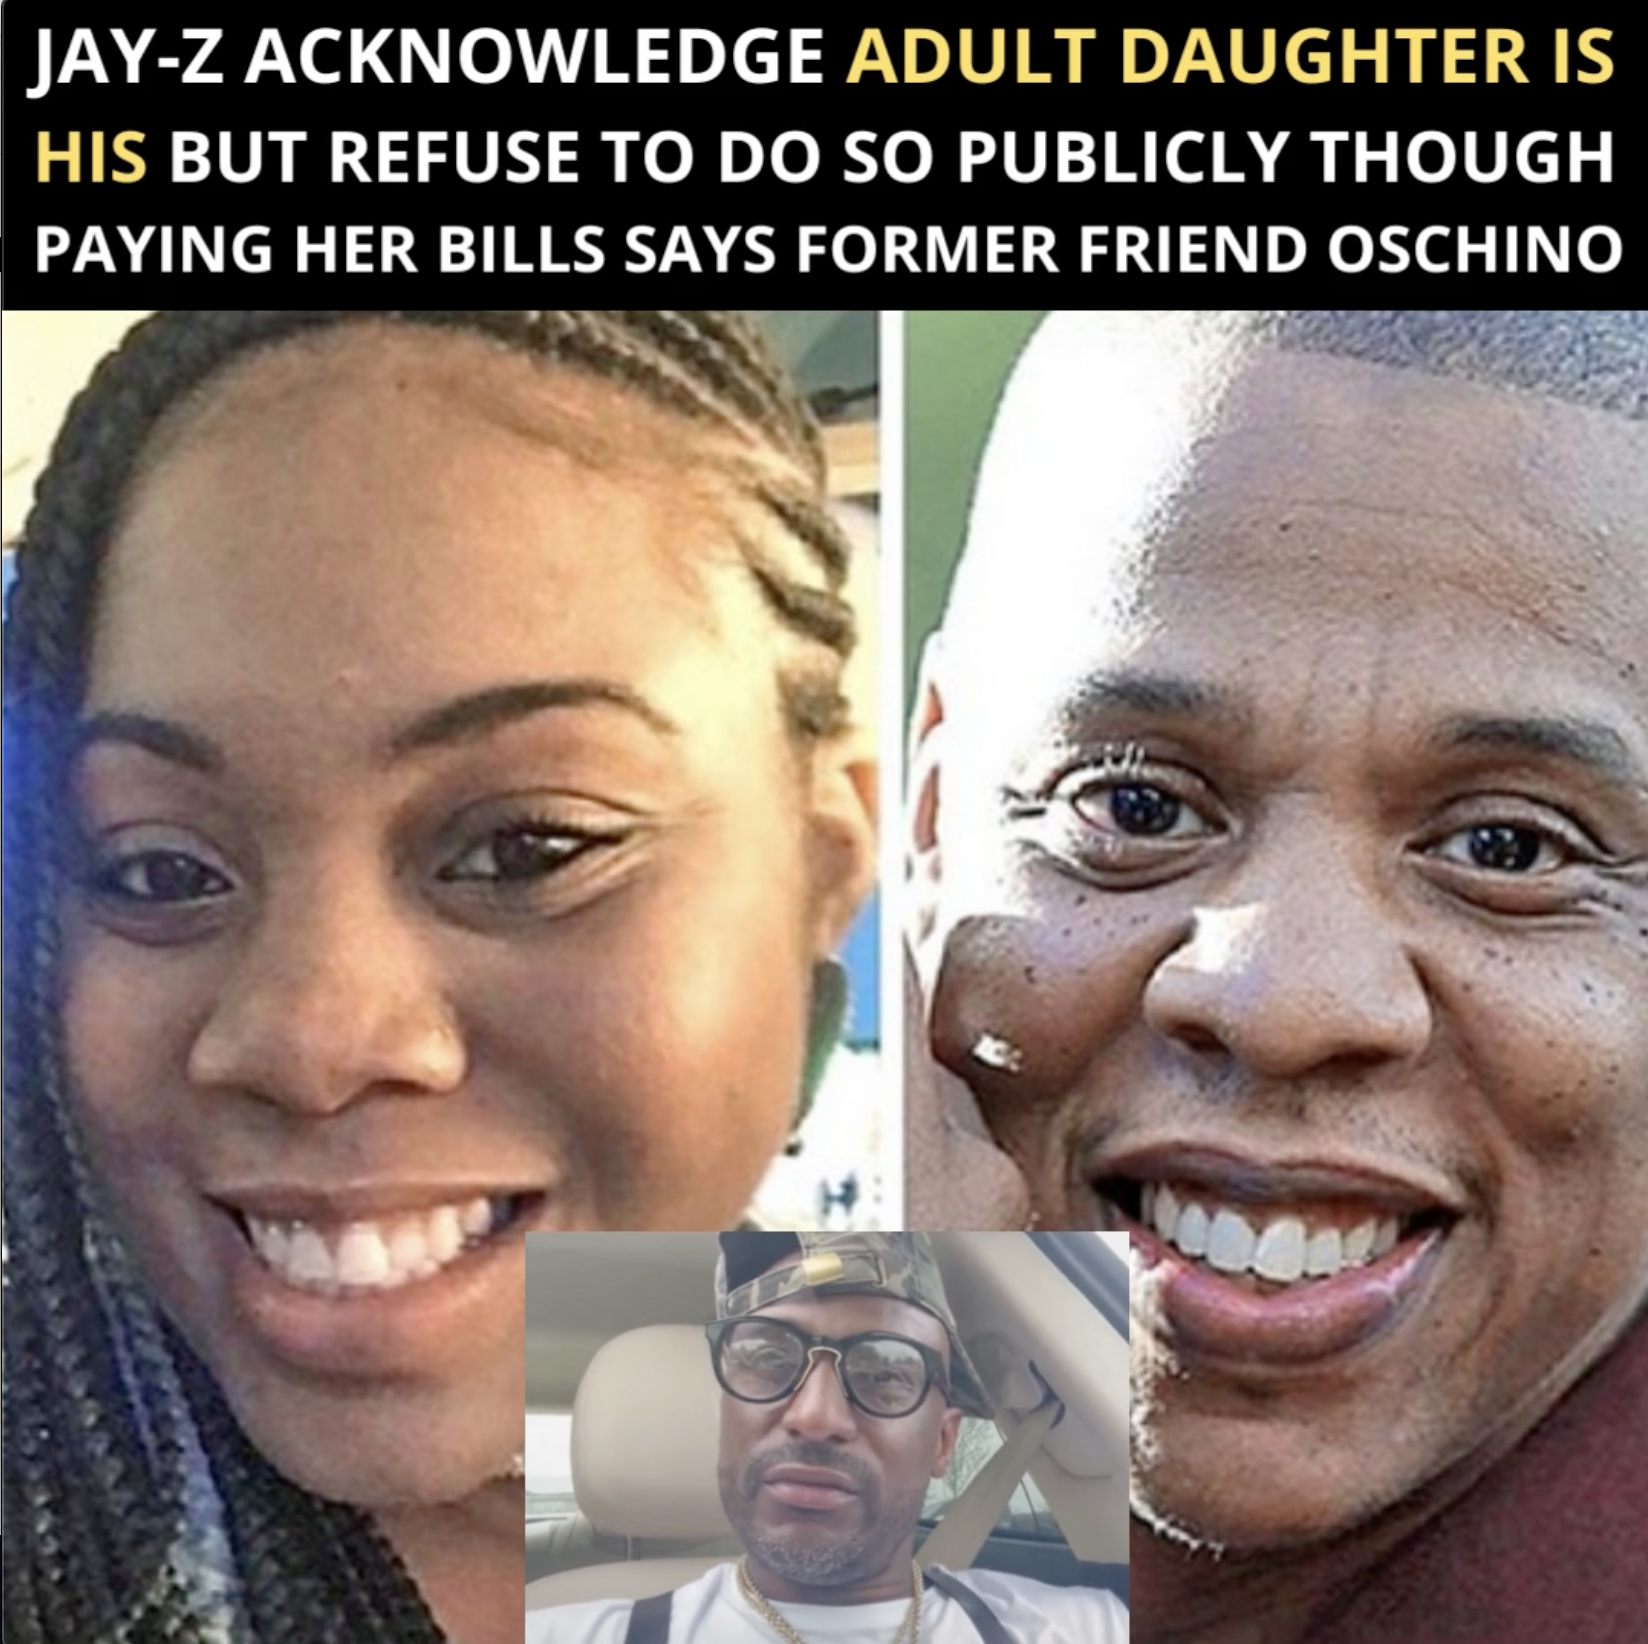 Jay-Z Acknowledge Adult Daughter Is His But Refuse To Do So Publicly Though He Buys Her House And Is Paying Her Bills Says Former Friend Oschino